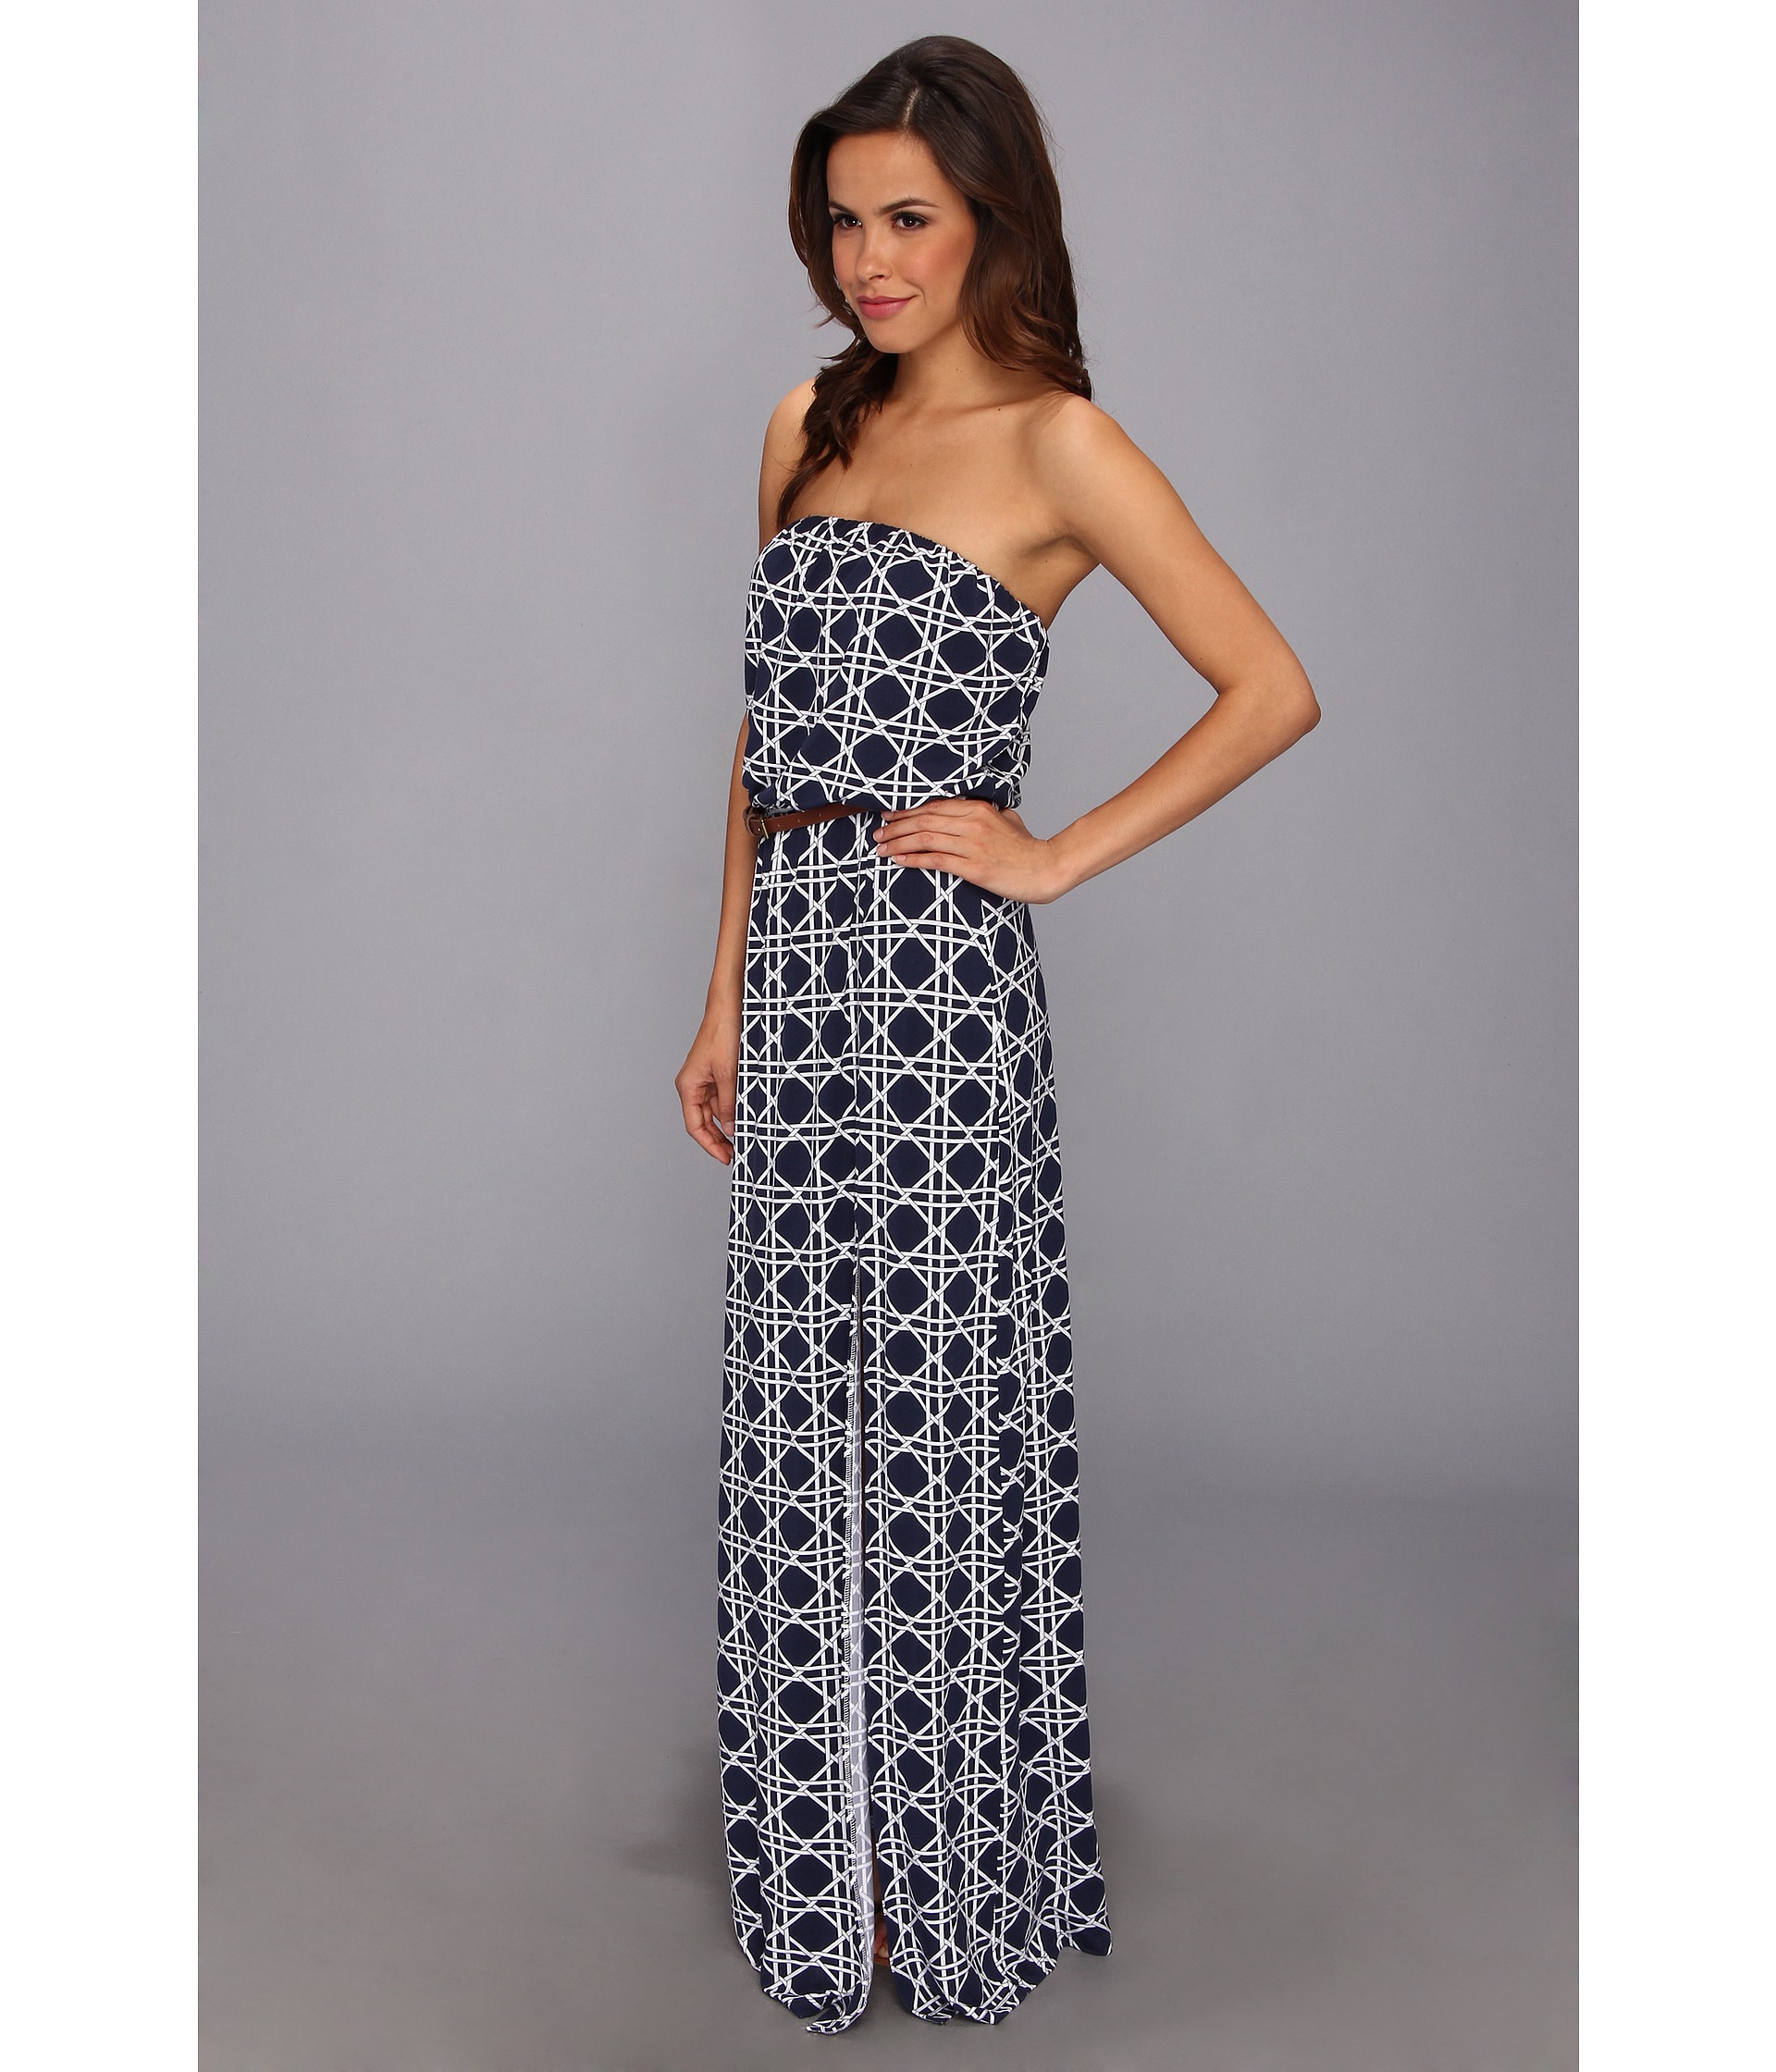 Start this season out right with the adorable Bristol Maxi. Elastic